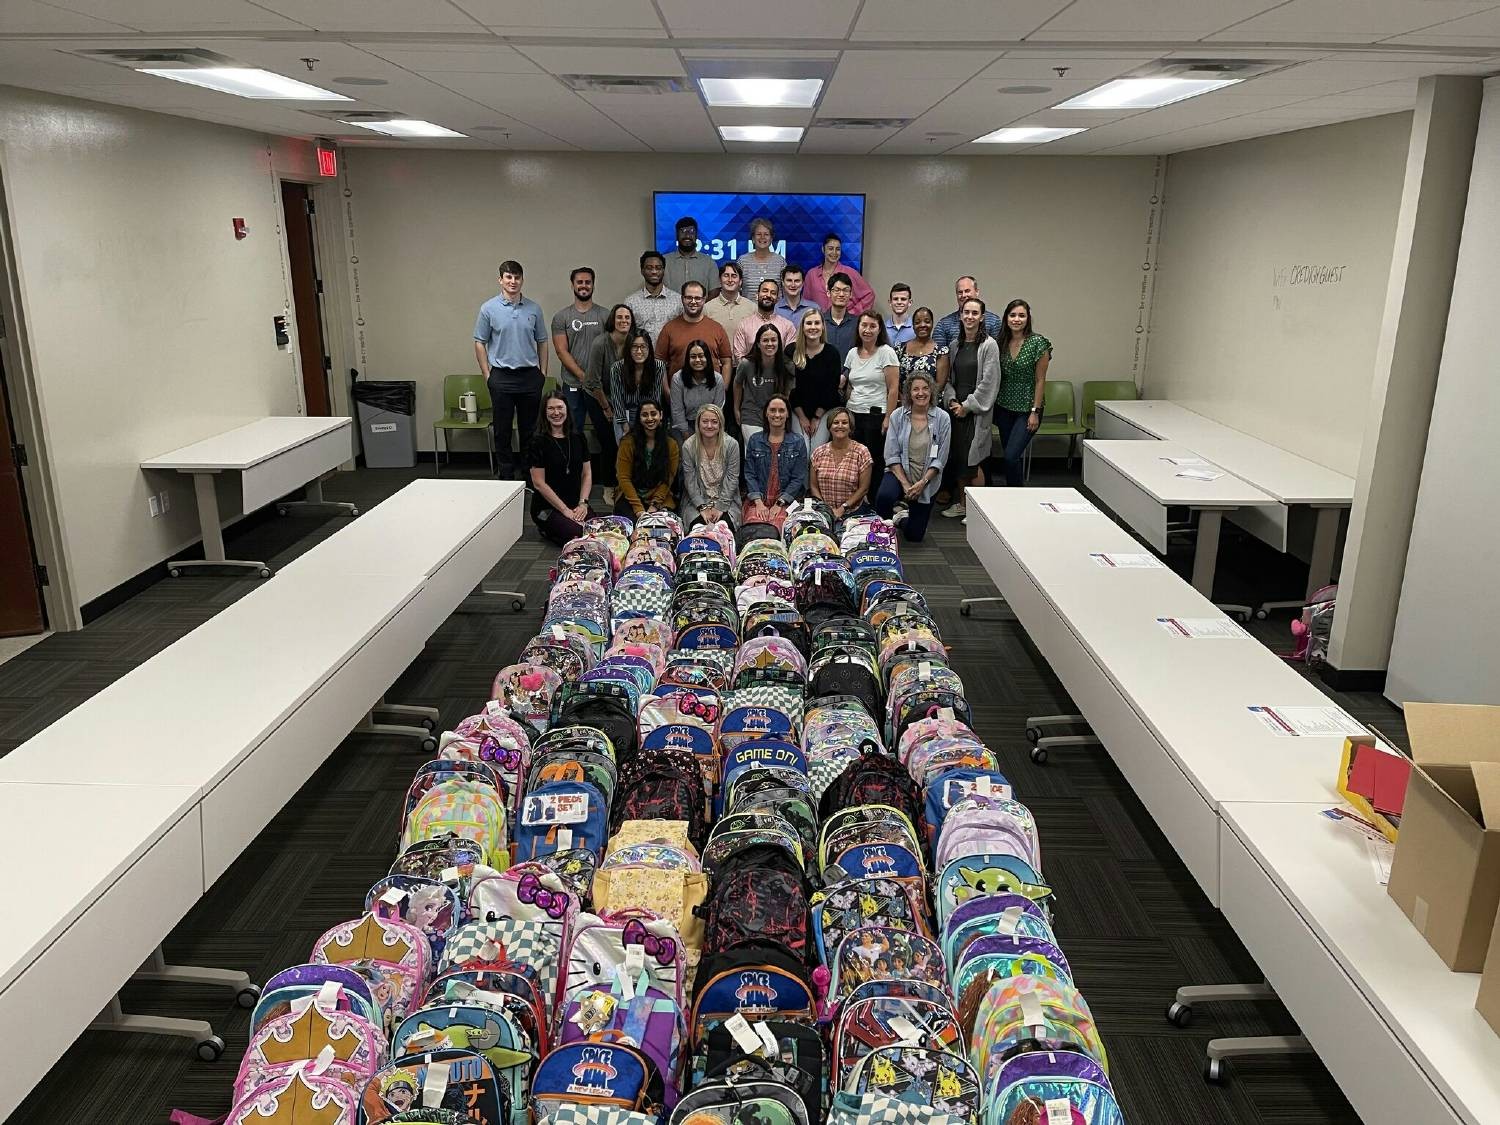 Employees packed 200 backpacks full of supplies for North Fulton Community Charities to help kids start the school year.